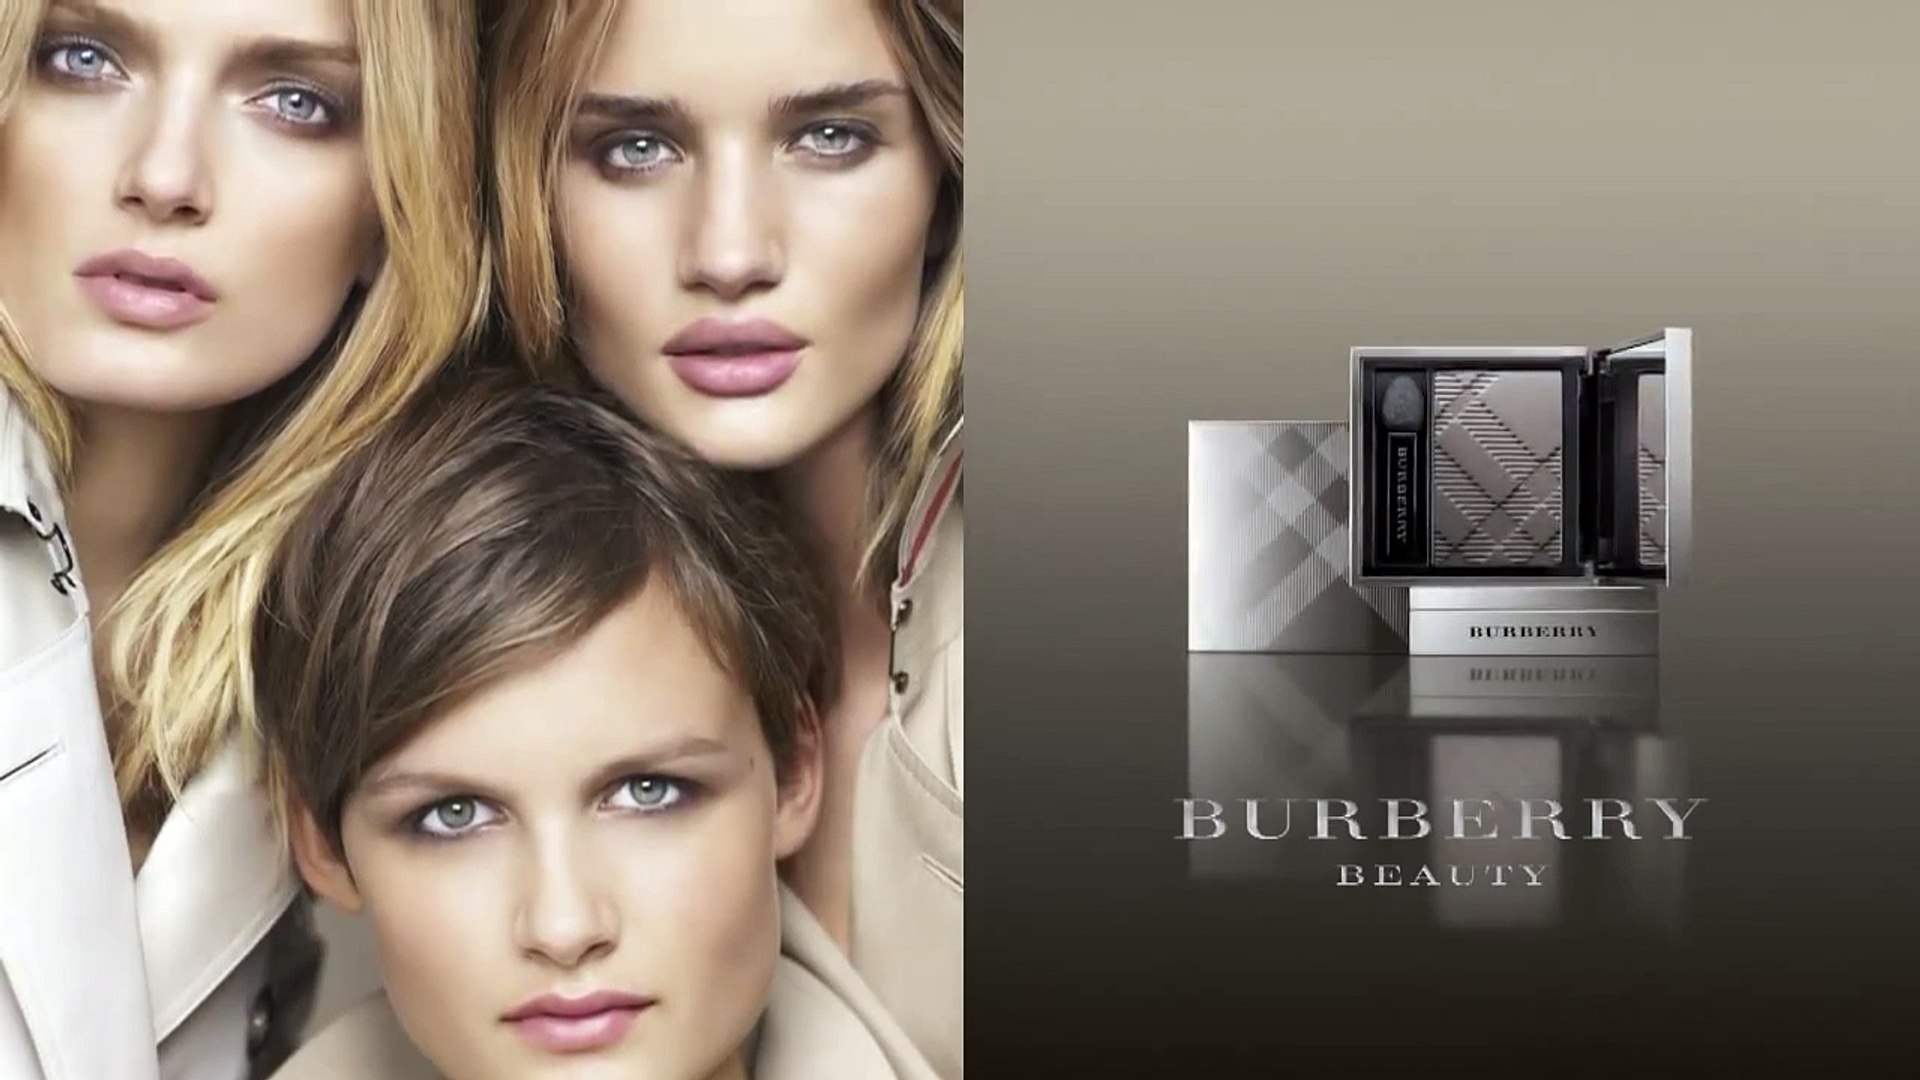 The Burberry Beauty Campaign